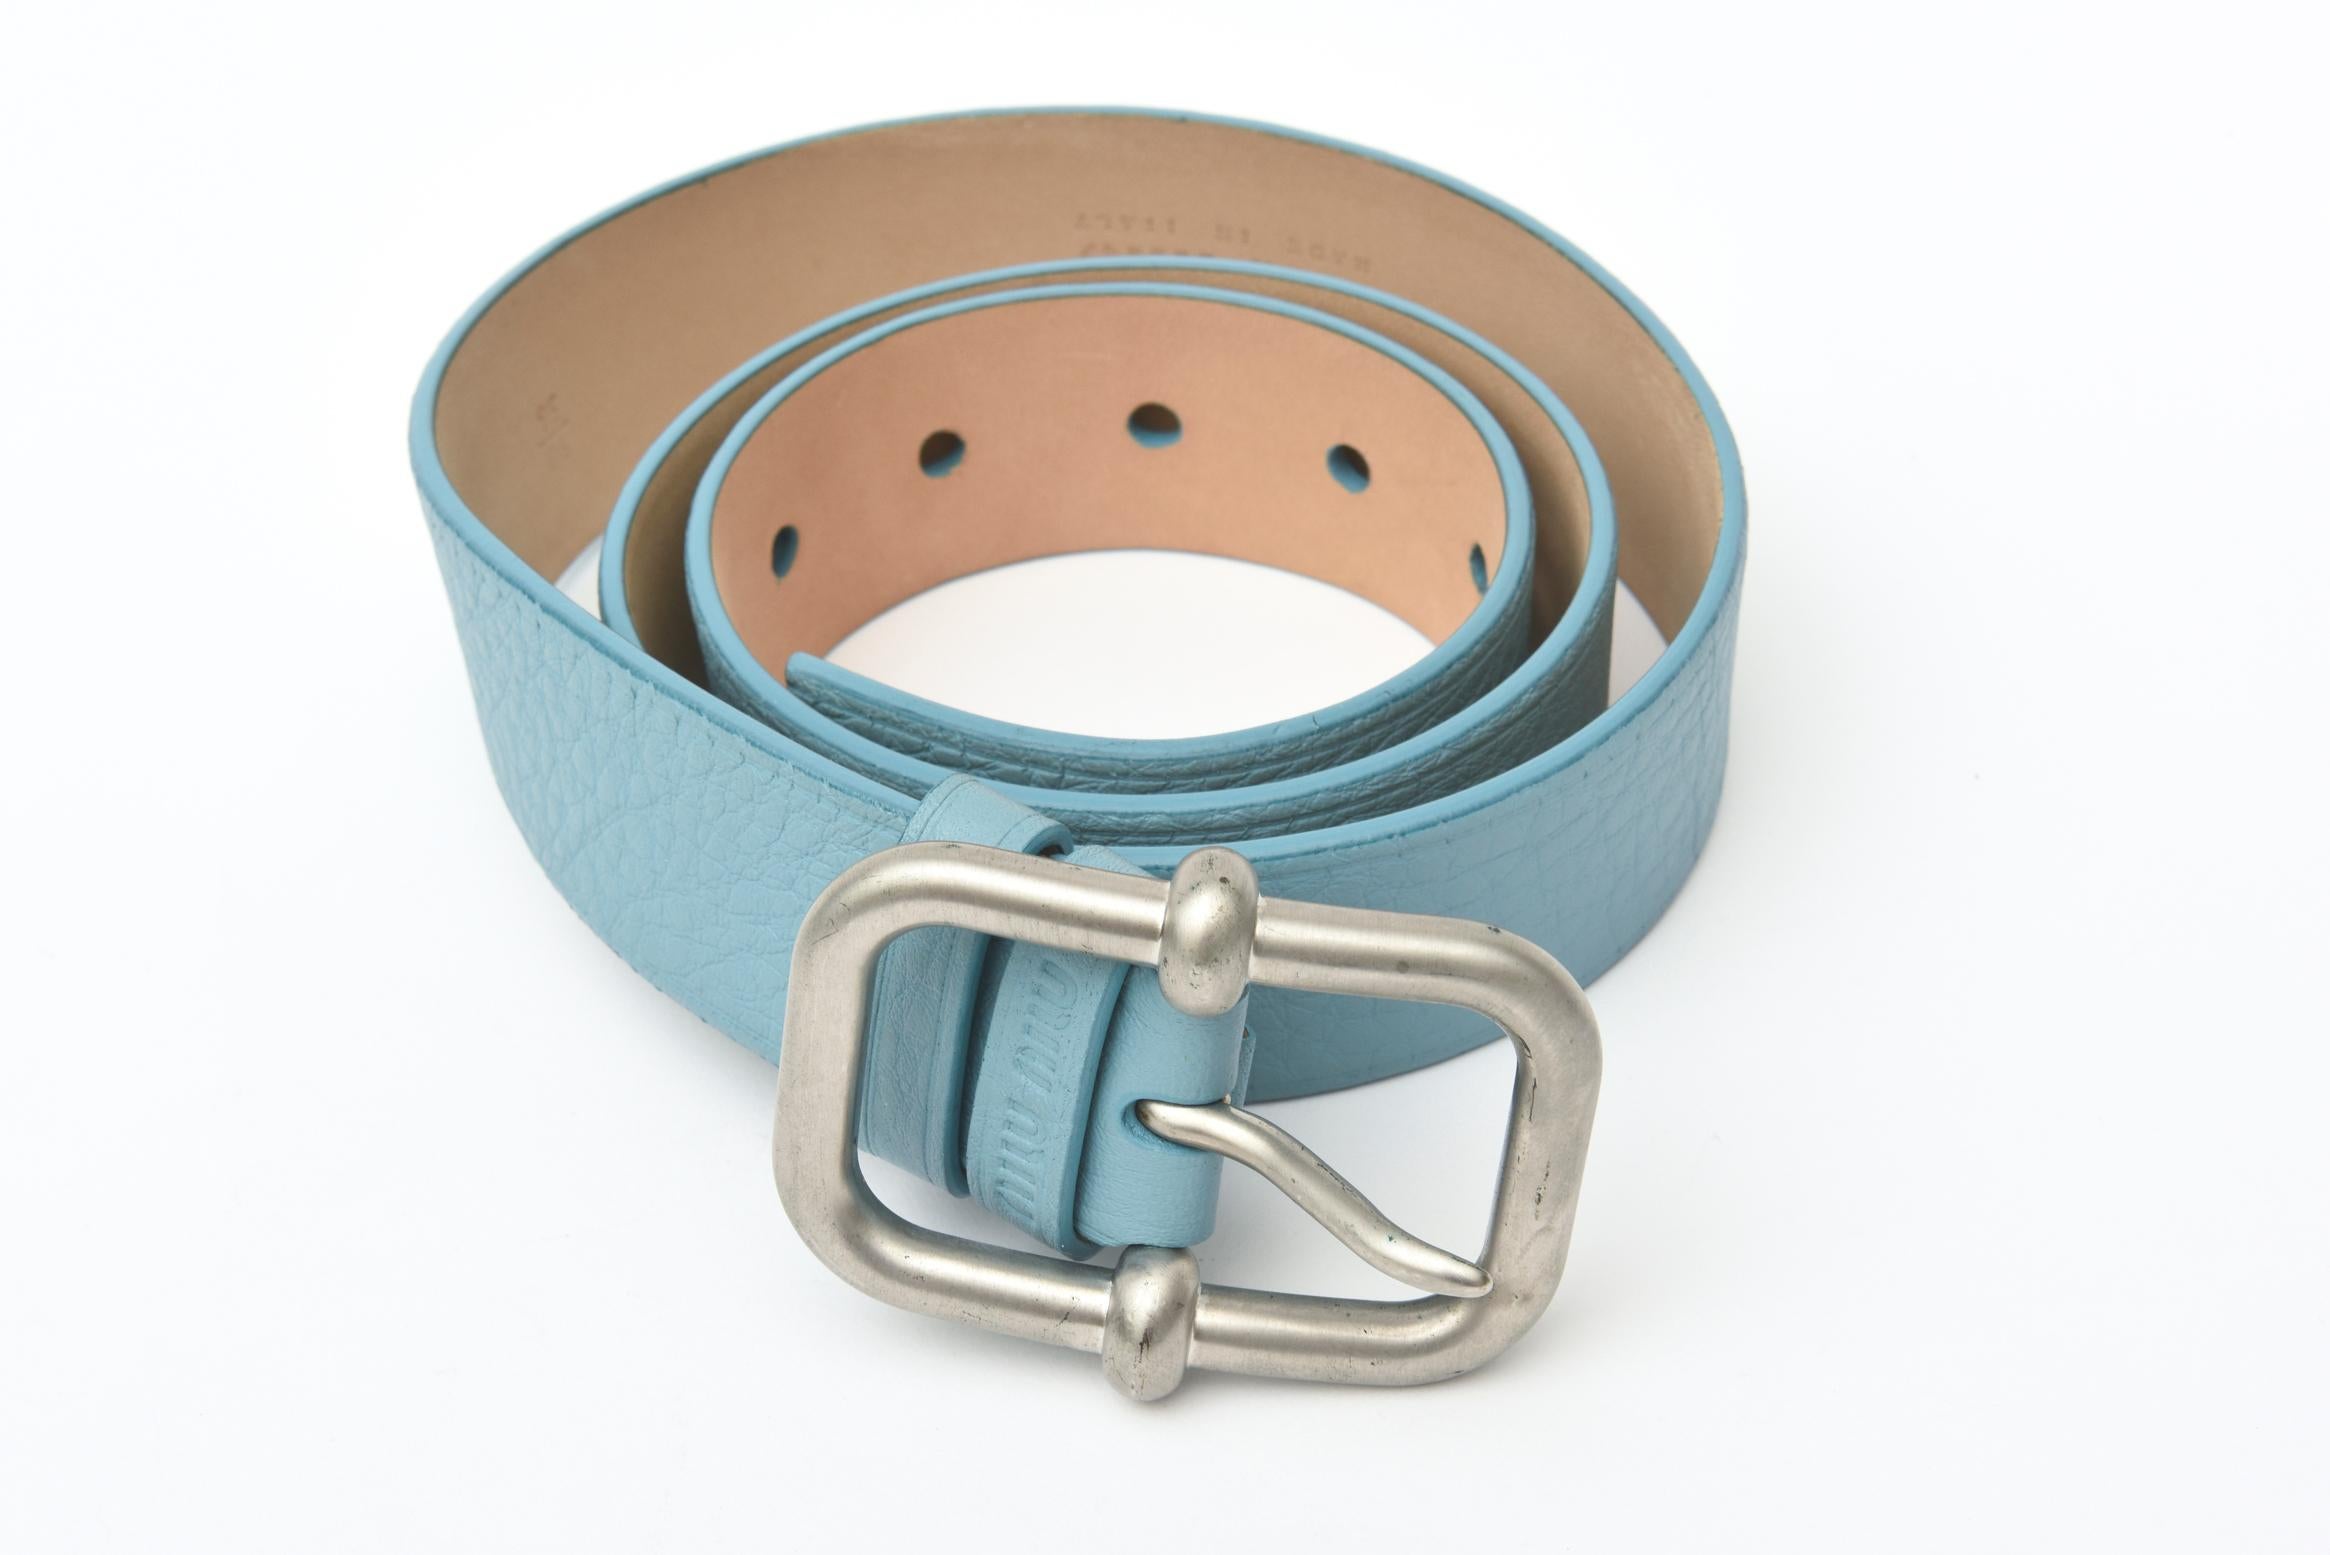 This wonderful pebbled leather belt has never been worn it was made in Italy for MUi Mui which is a subsidiary of Prada and is headed by Miuccia Prada and headquartered in Paris France. It is the lovely cornflower blue meets tiffany blue meets light